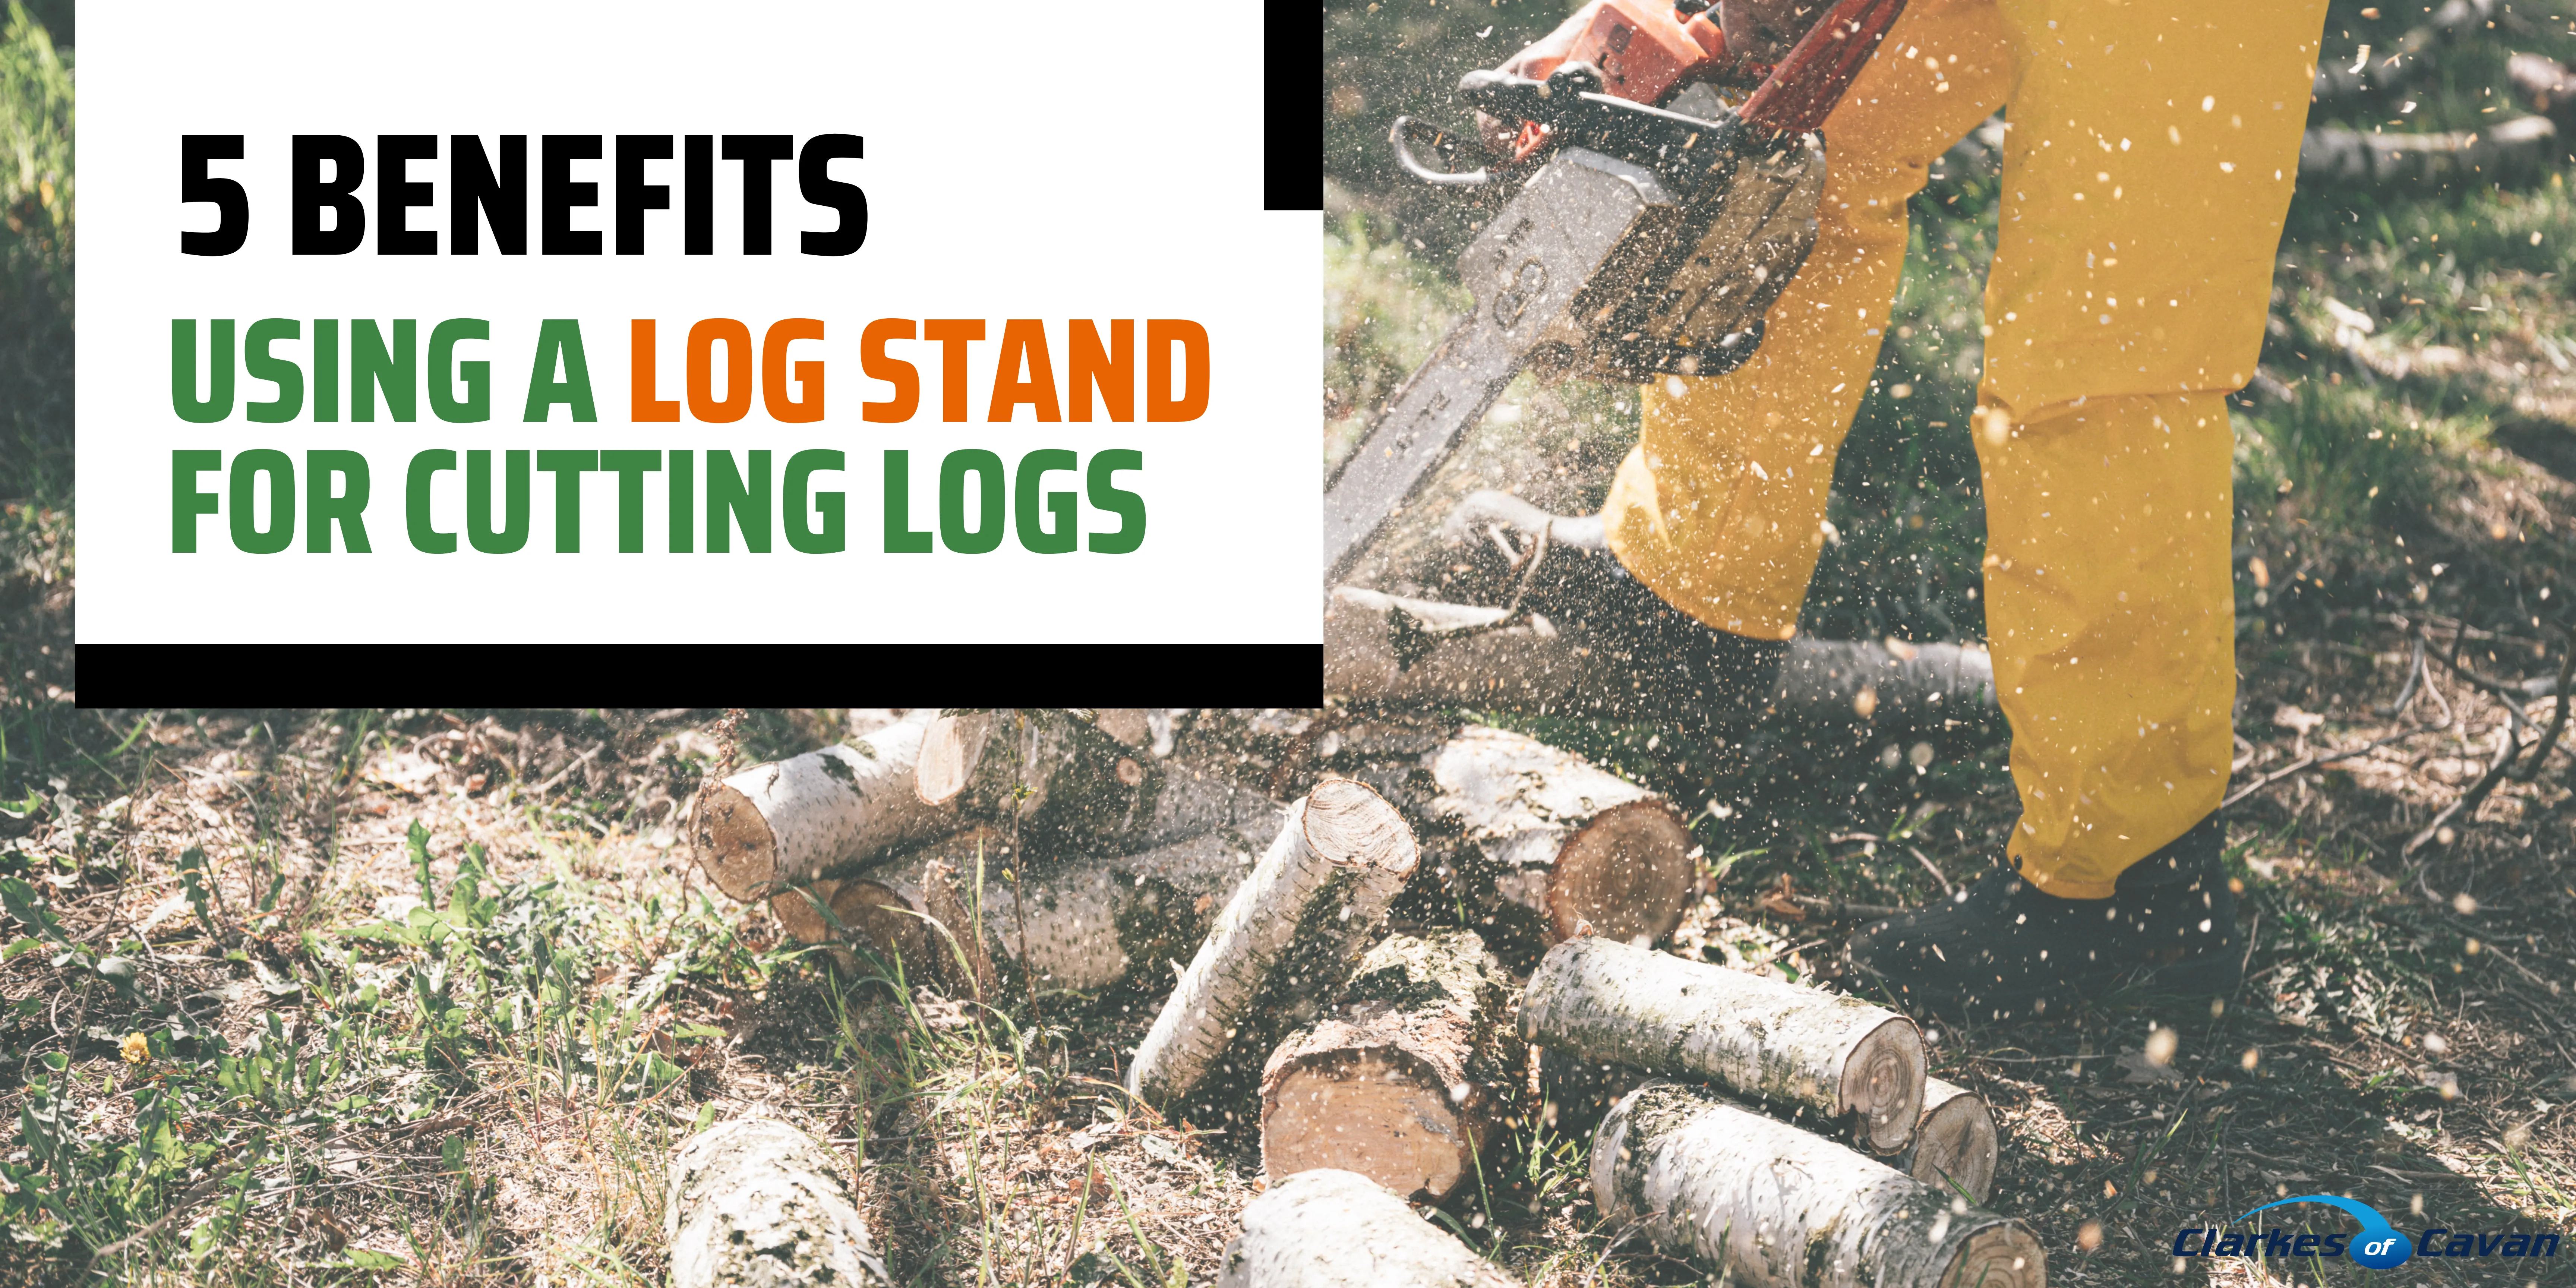 5 Benefits of Using a Log Stand for Cutting Logs